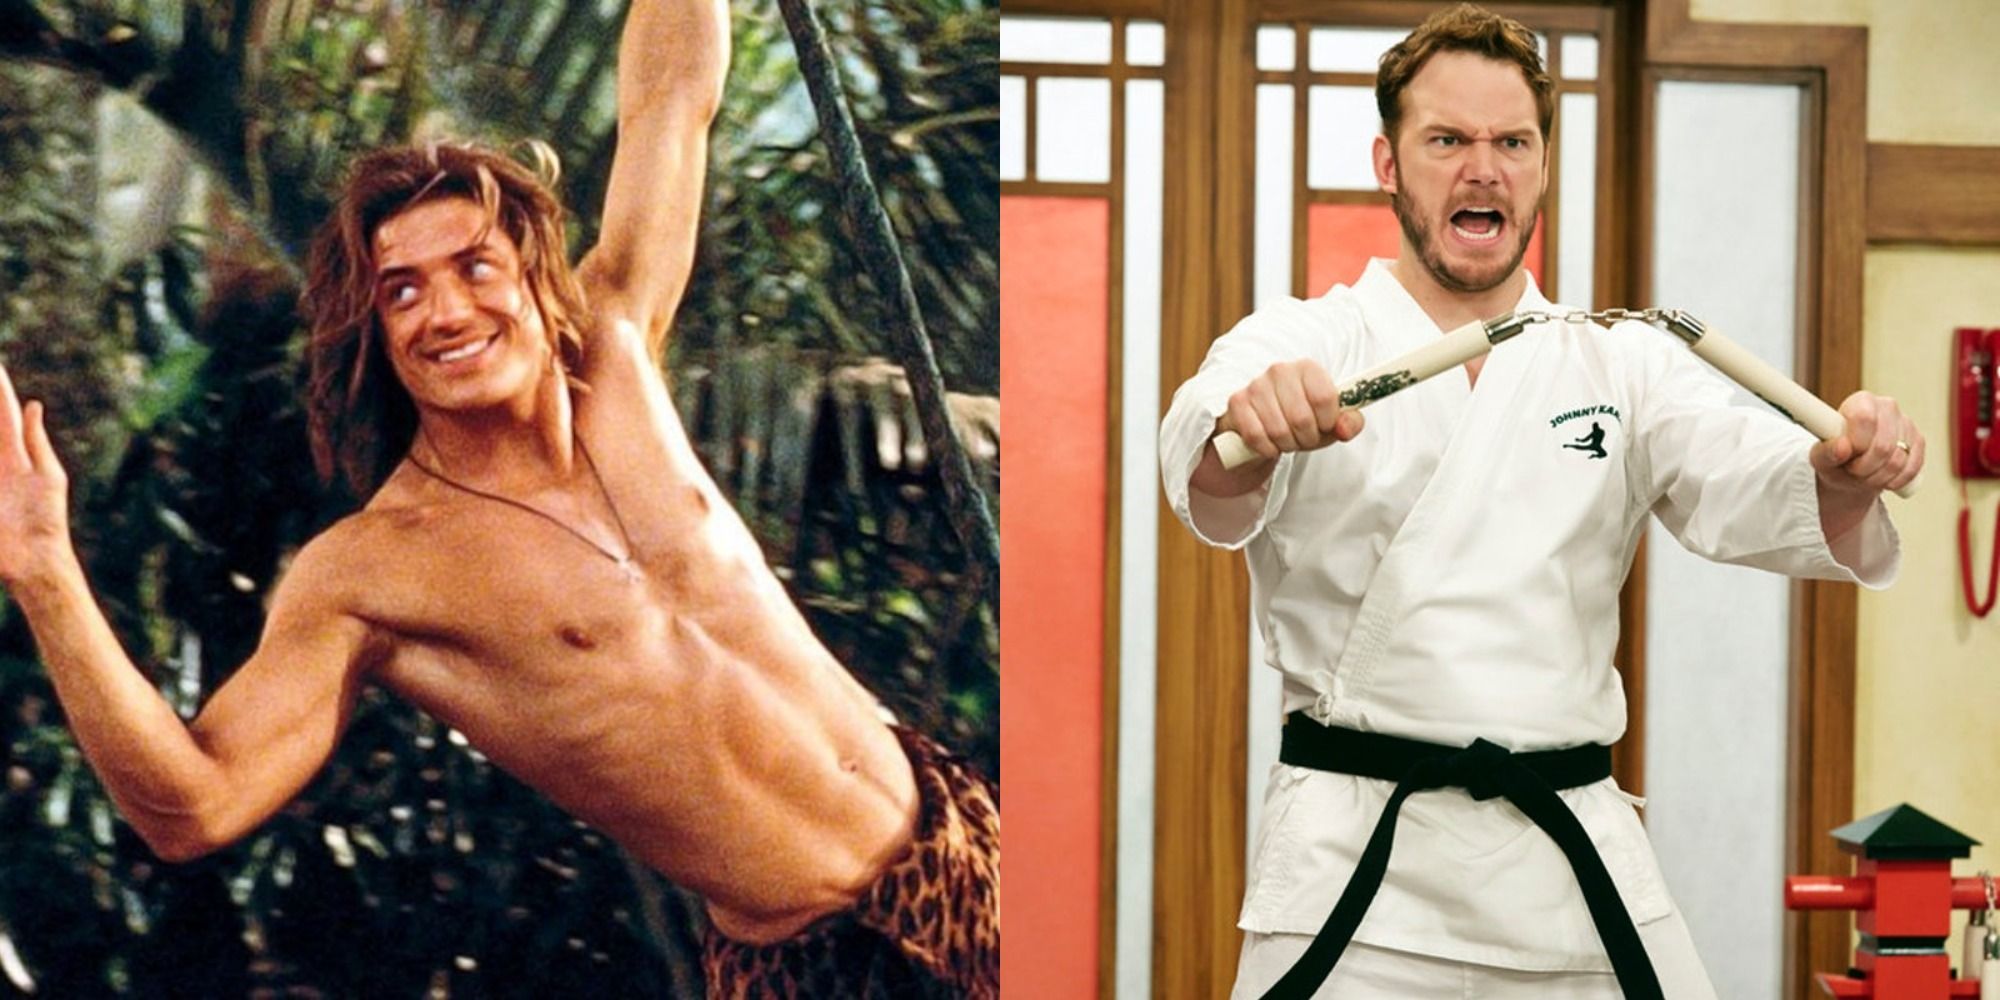 Split image of George of the Jungle swinging and Andy Dwyer doing karate